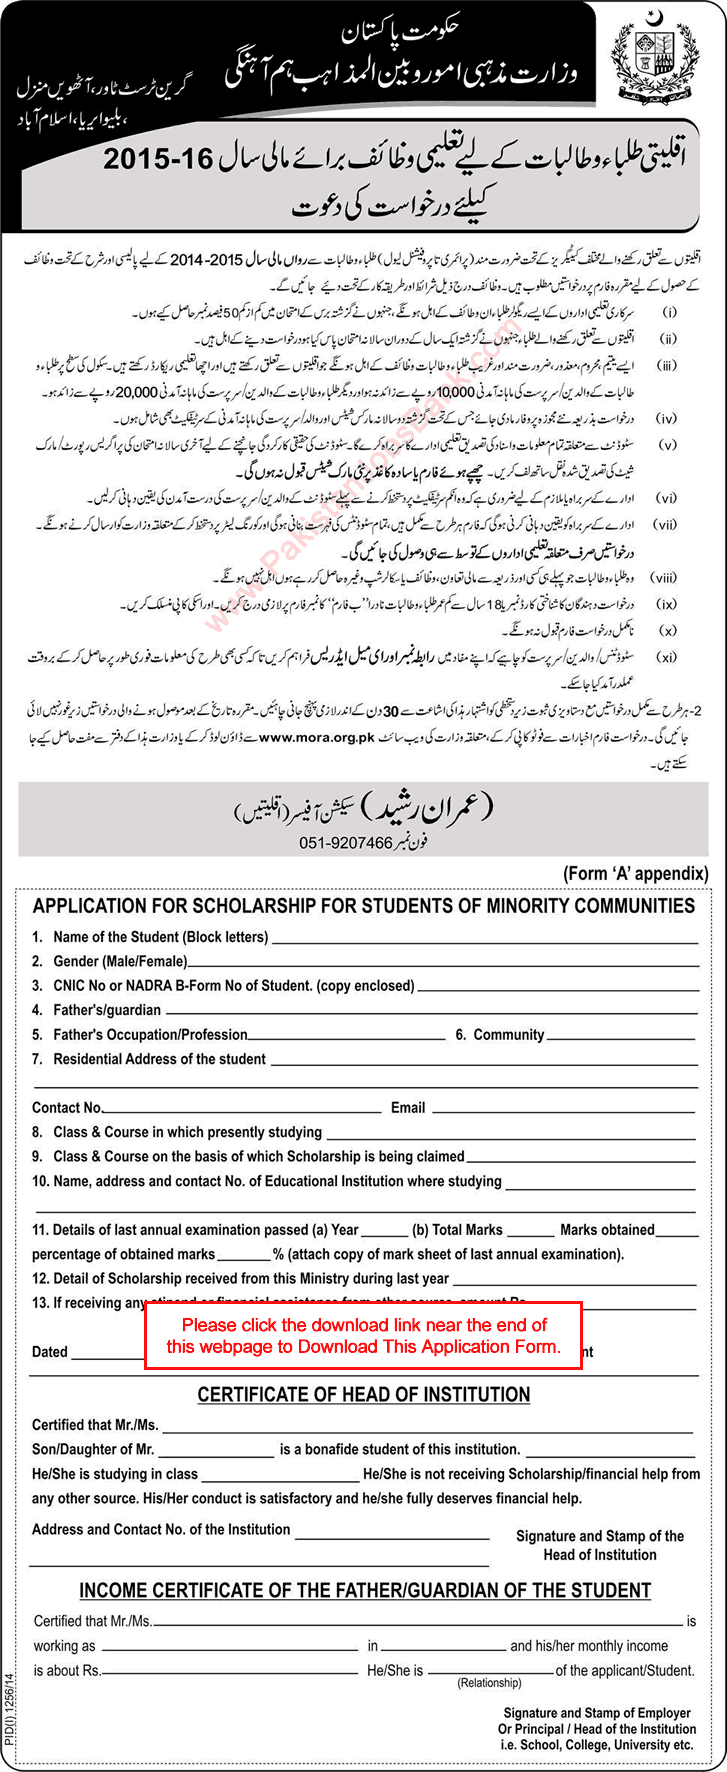 Ministry of Religious Affairs Scholarships for Minorities Students 2015 September Application Form Download